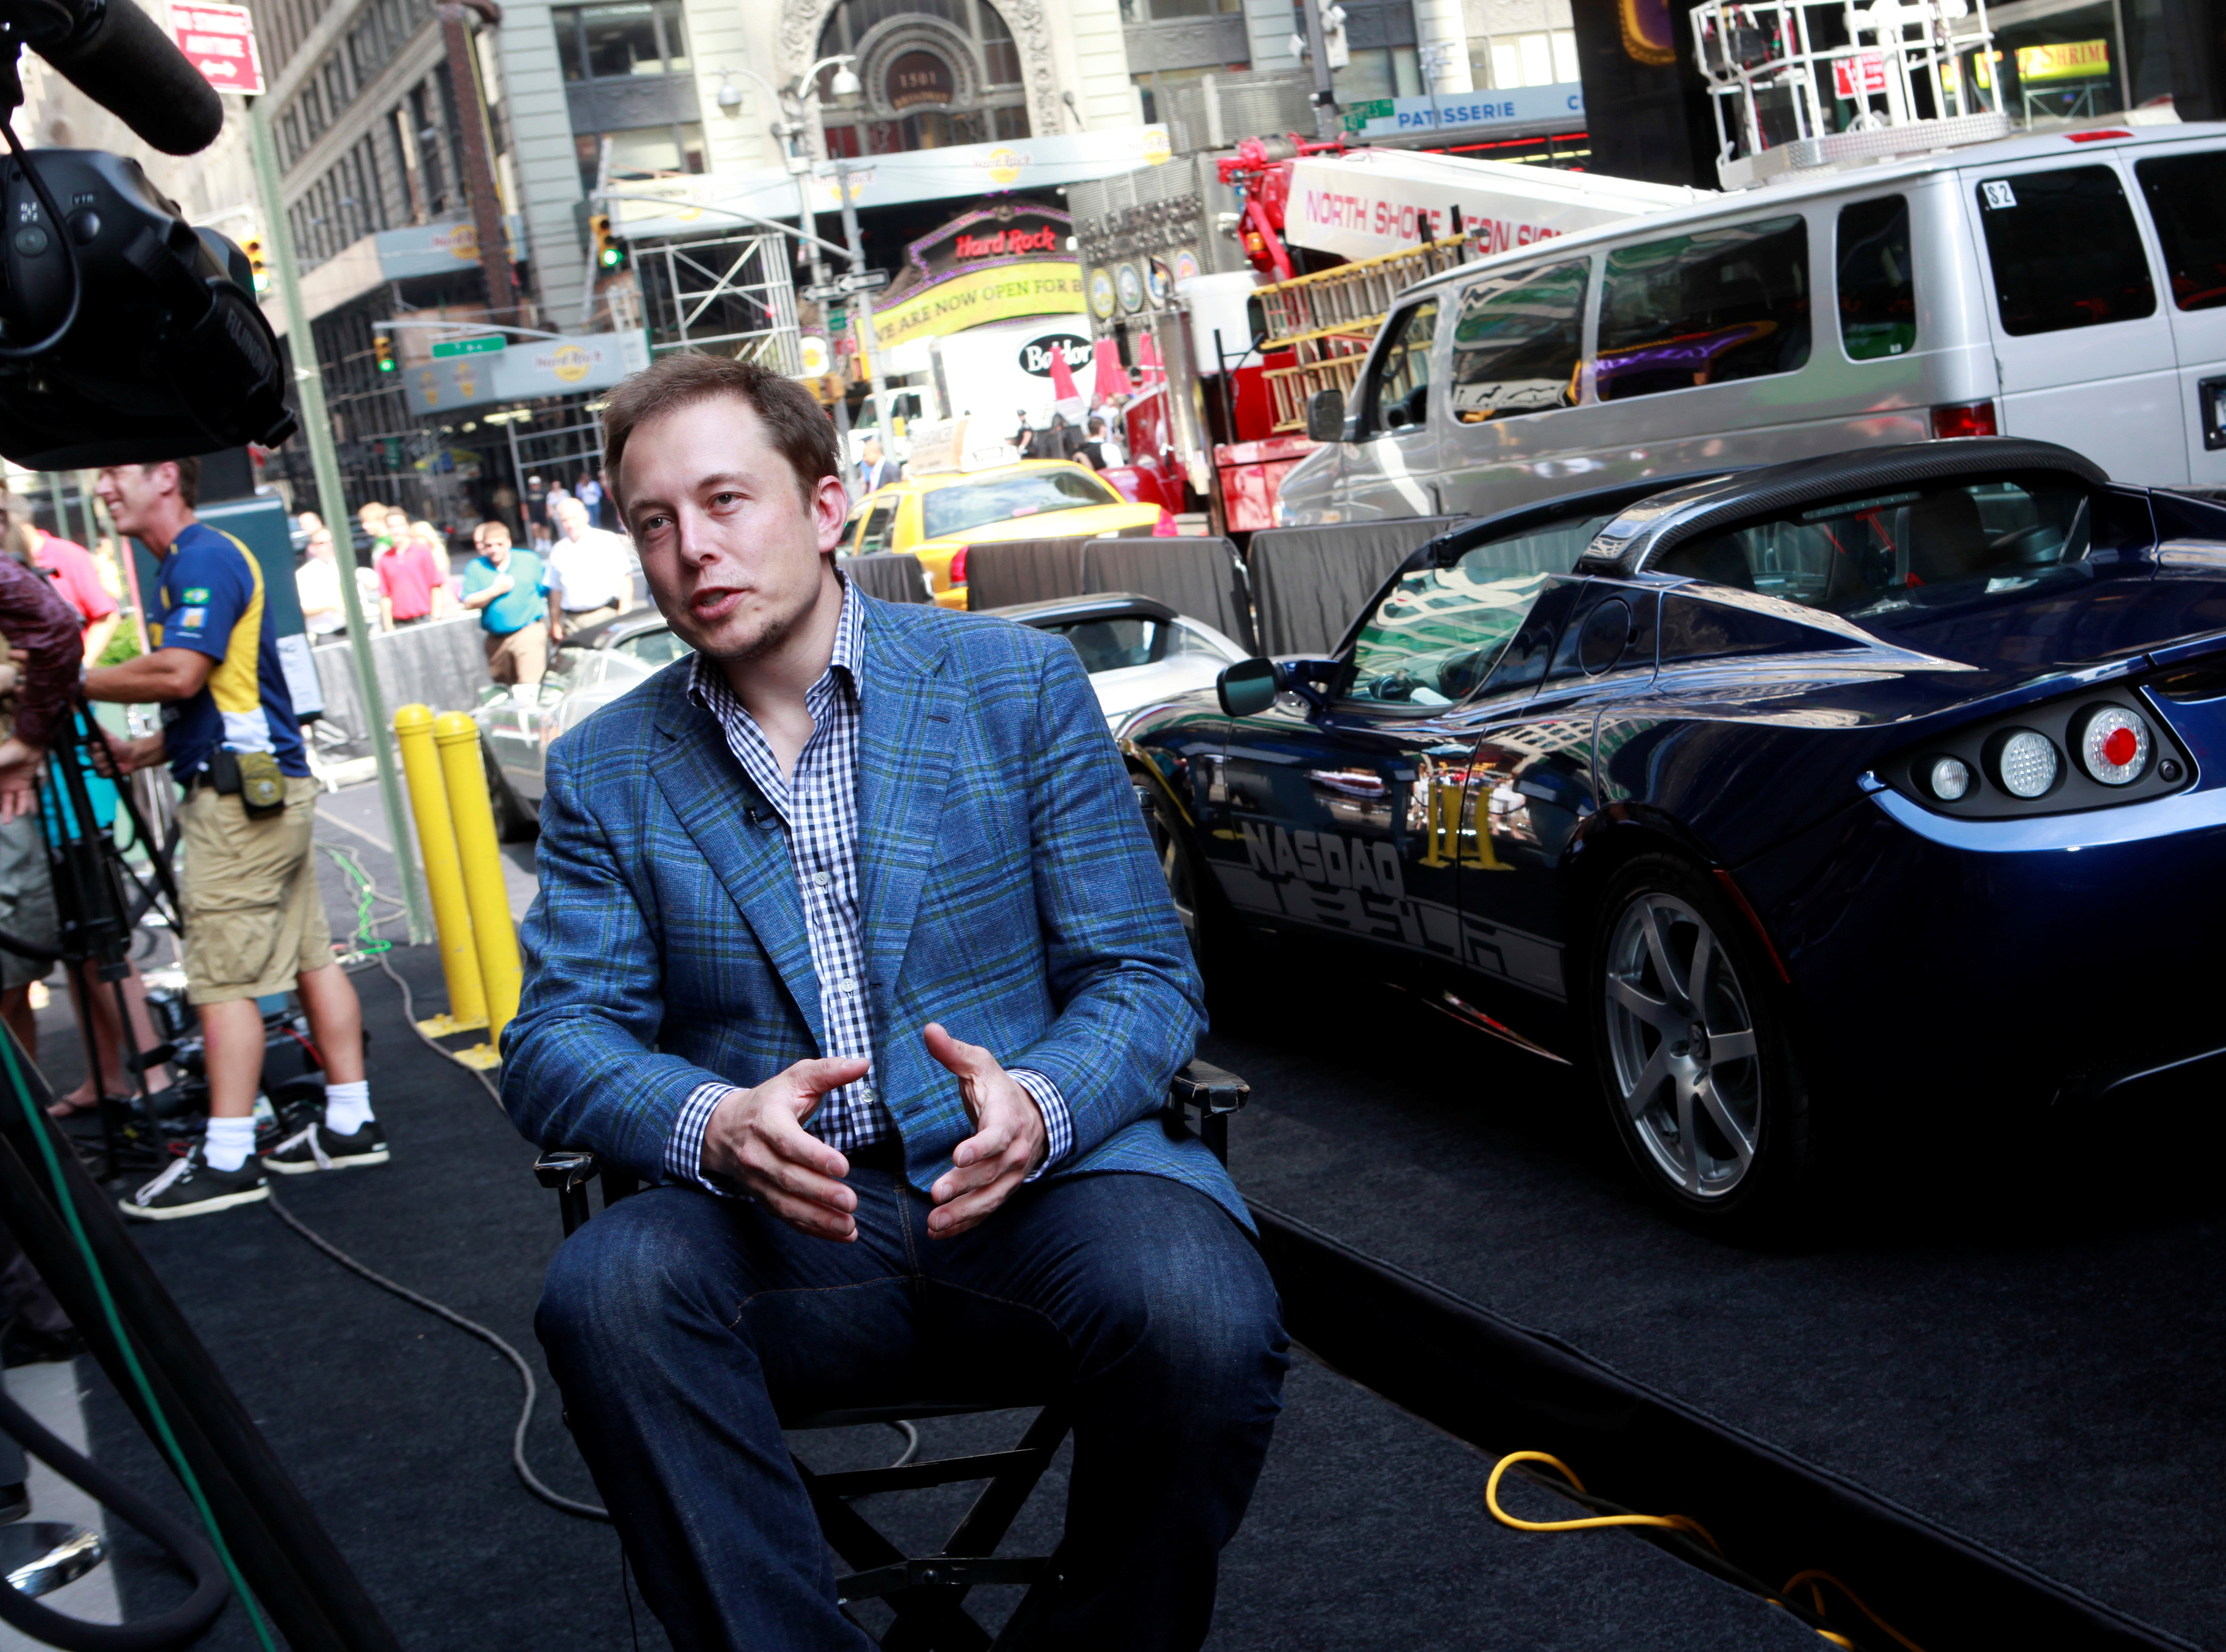 CEO of Tesla Motors Elon Musk speaks during a television interview after his company's initial public offering at the NASDAQ market in New York, June 29, 2010. REUTERS/Brendan McDermid/File Photo